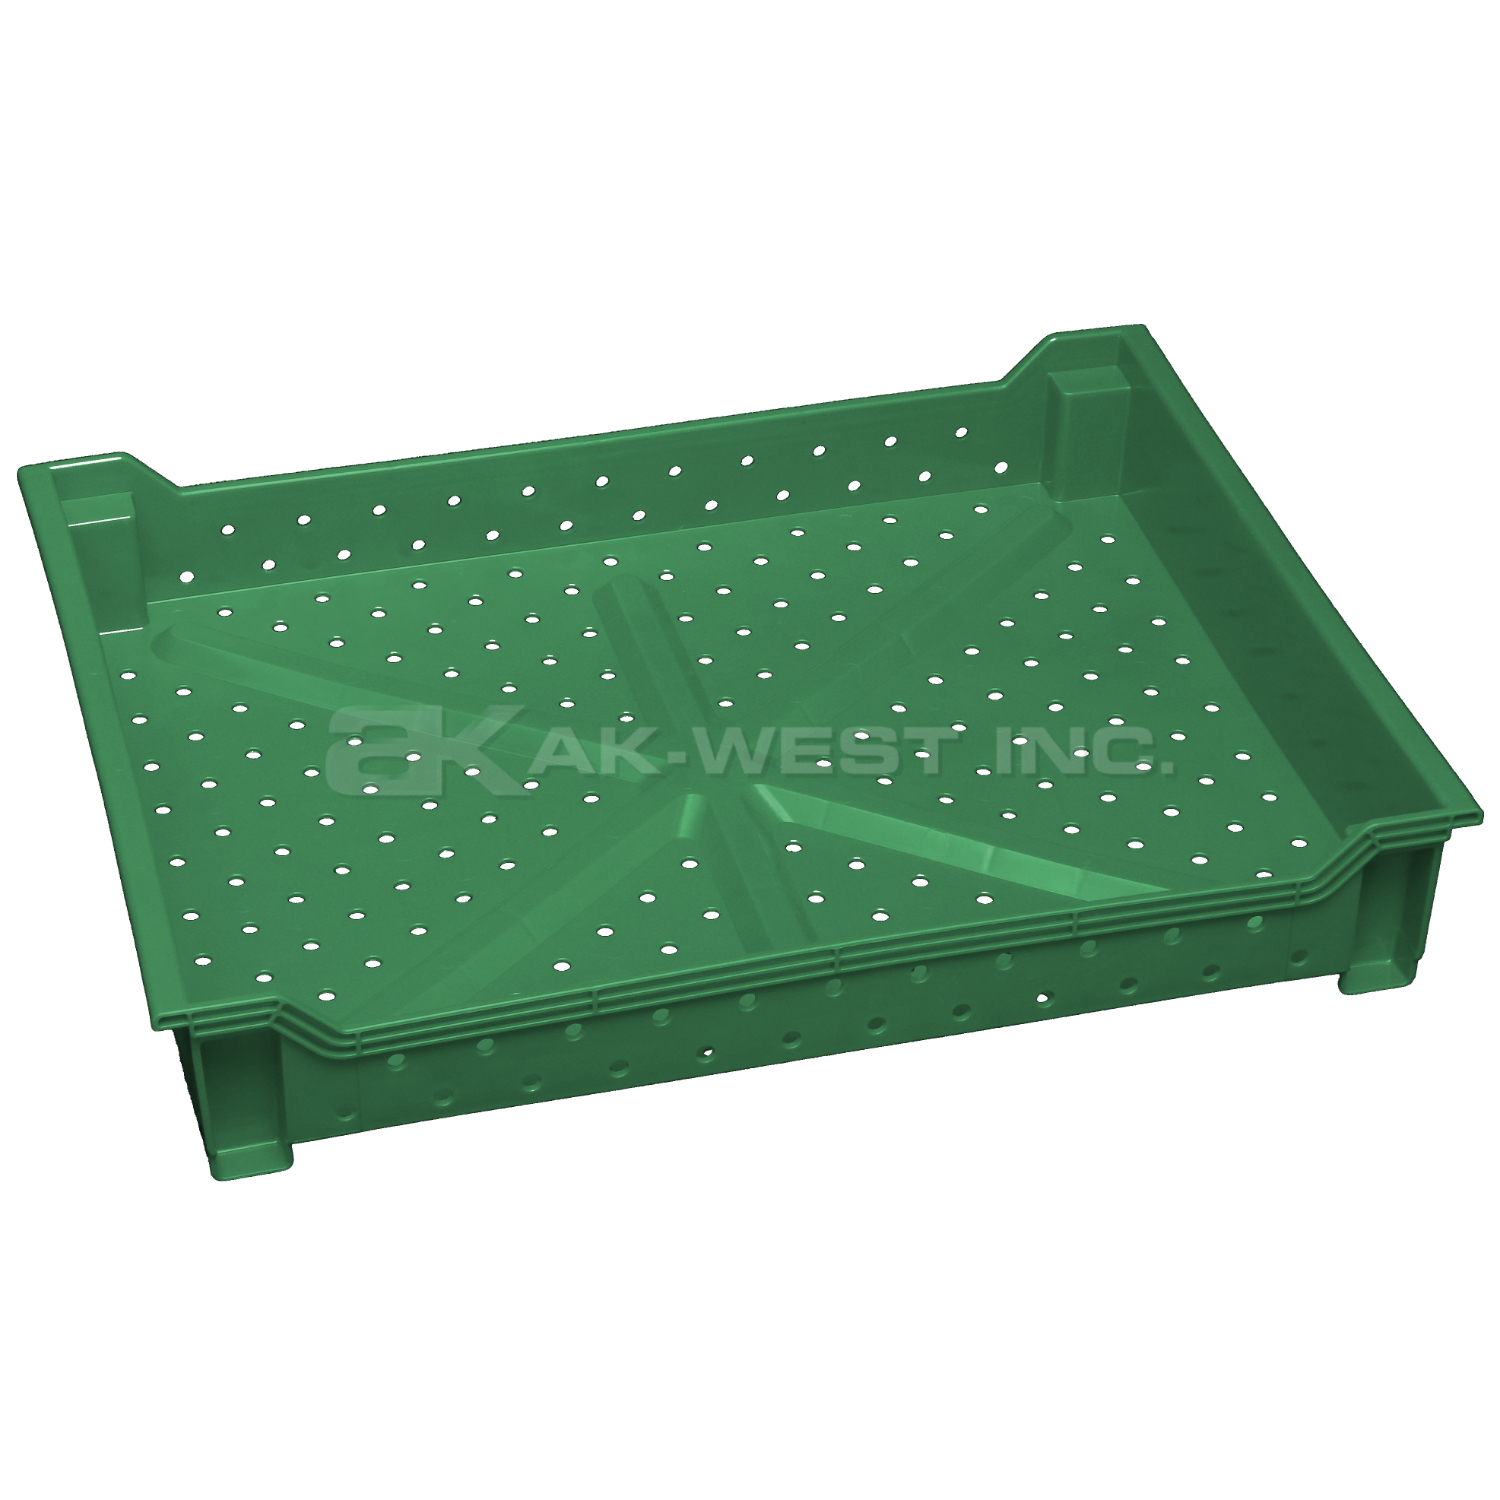 Green, 24"L x 18"W x 4"H Stackable Tray w/ Vented Sides and Base